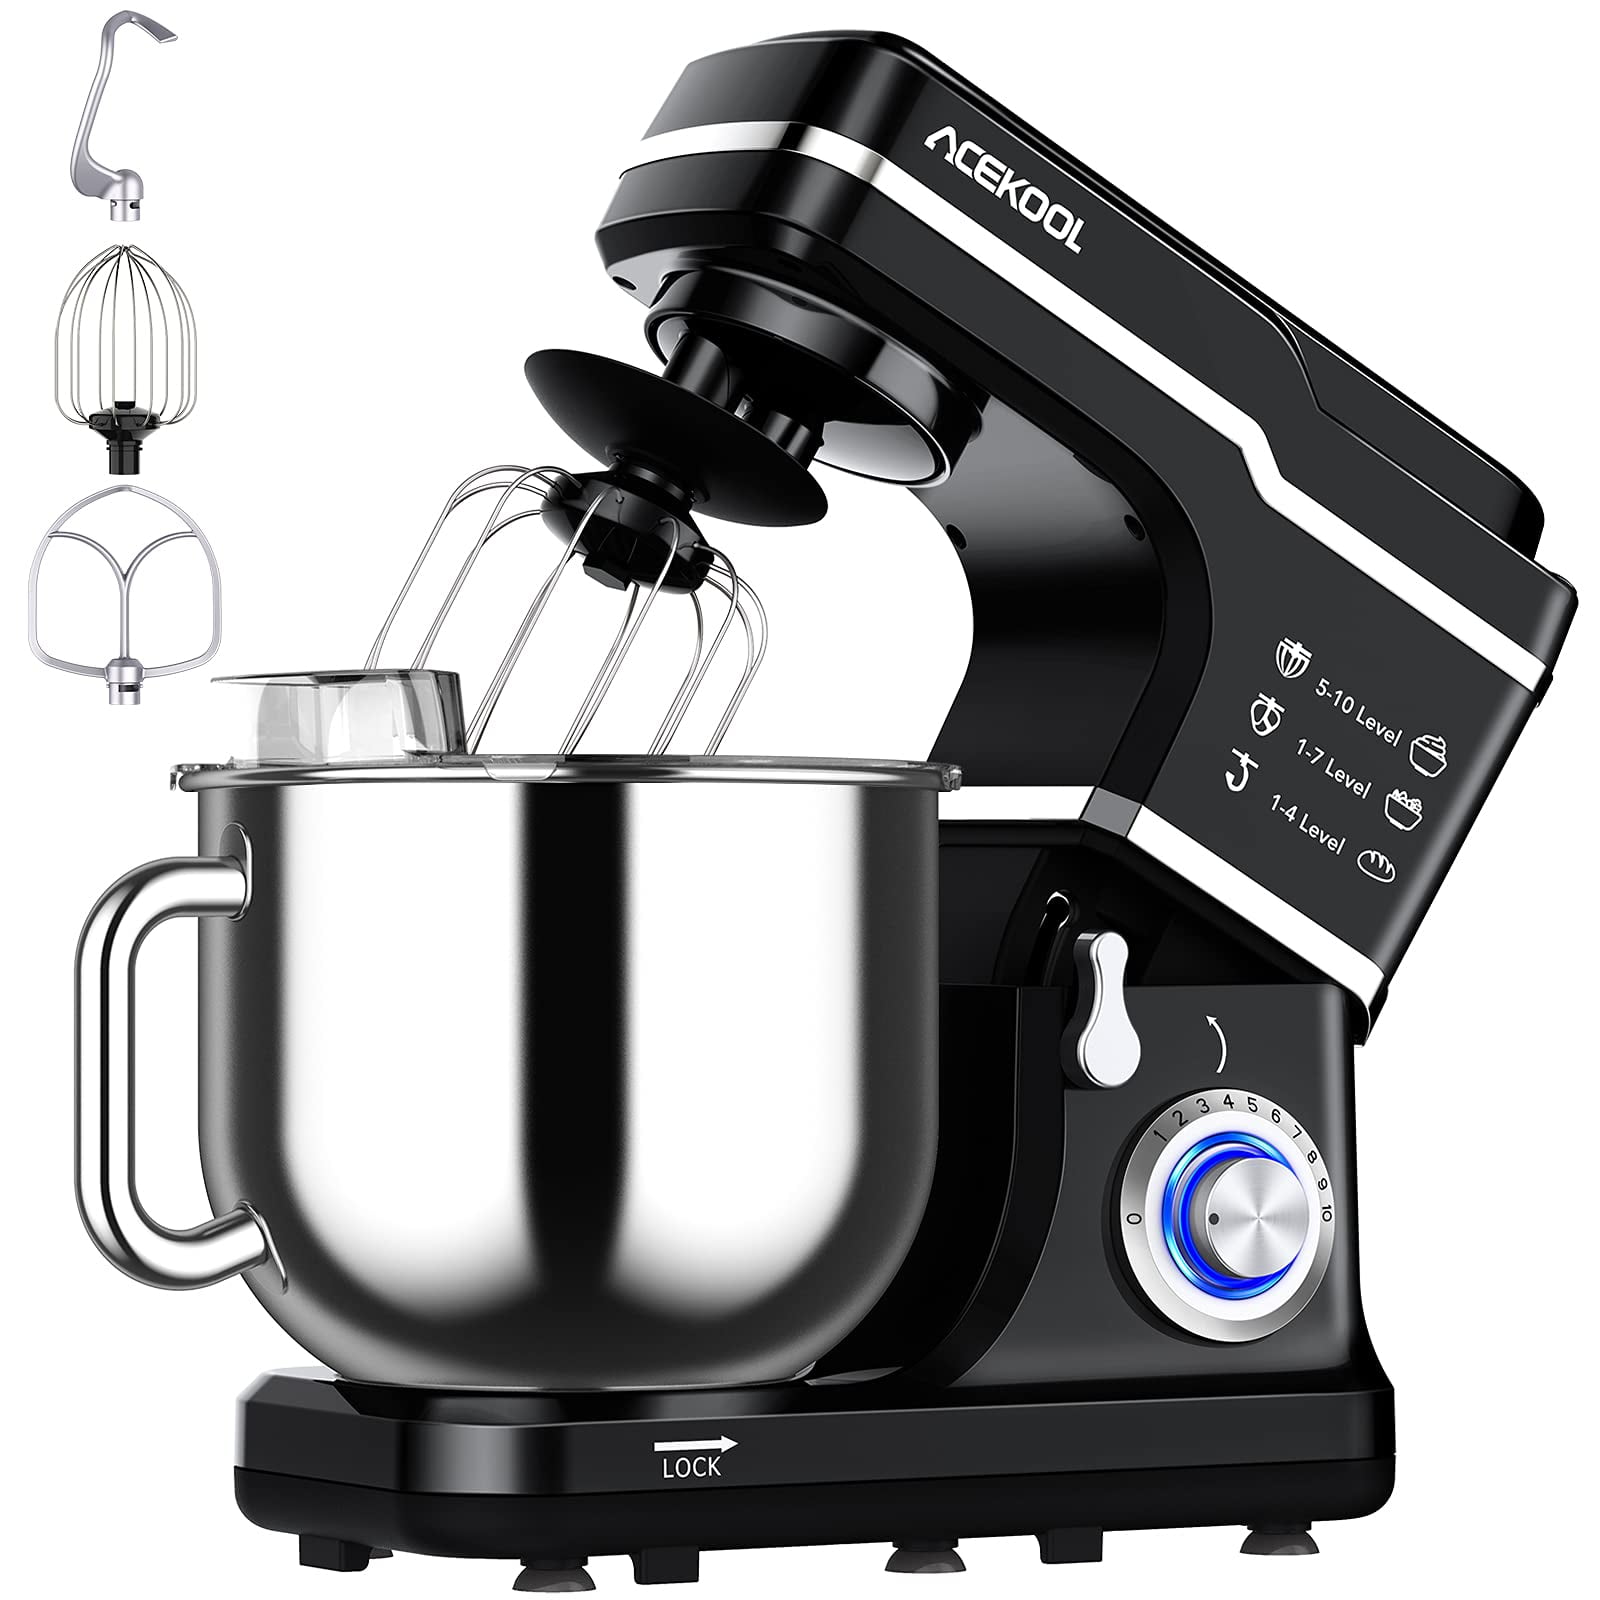 LingStar Stand Mixer,6.7L 660W 10-Speed Tilt-Head Food Mixer, Kitchen Electric Mixer with Dough Hook, Wire Whip & Beater (Black) -New in Box